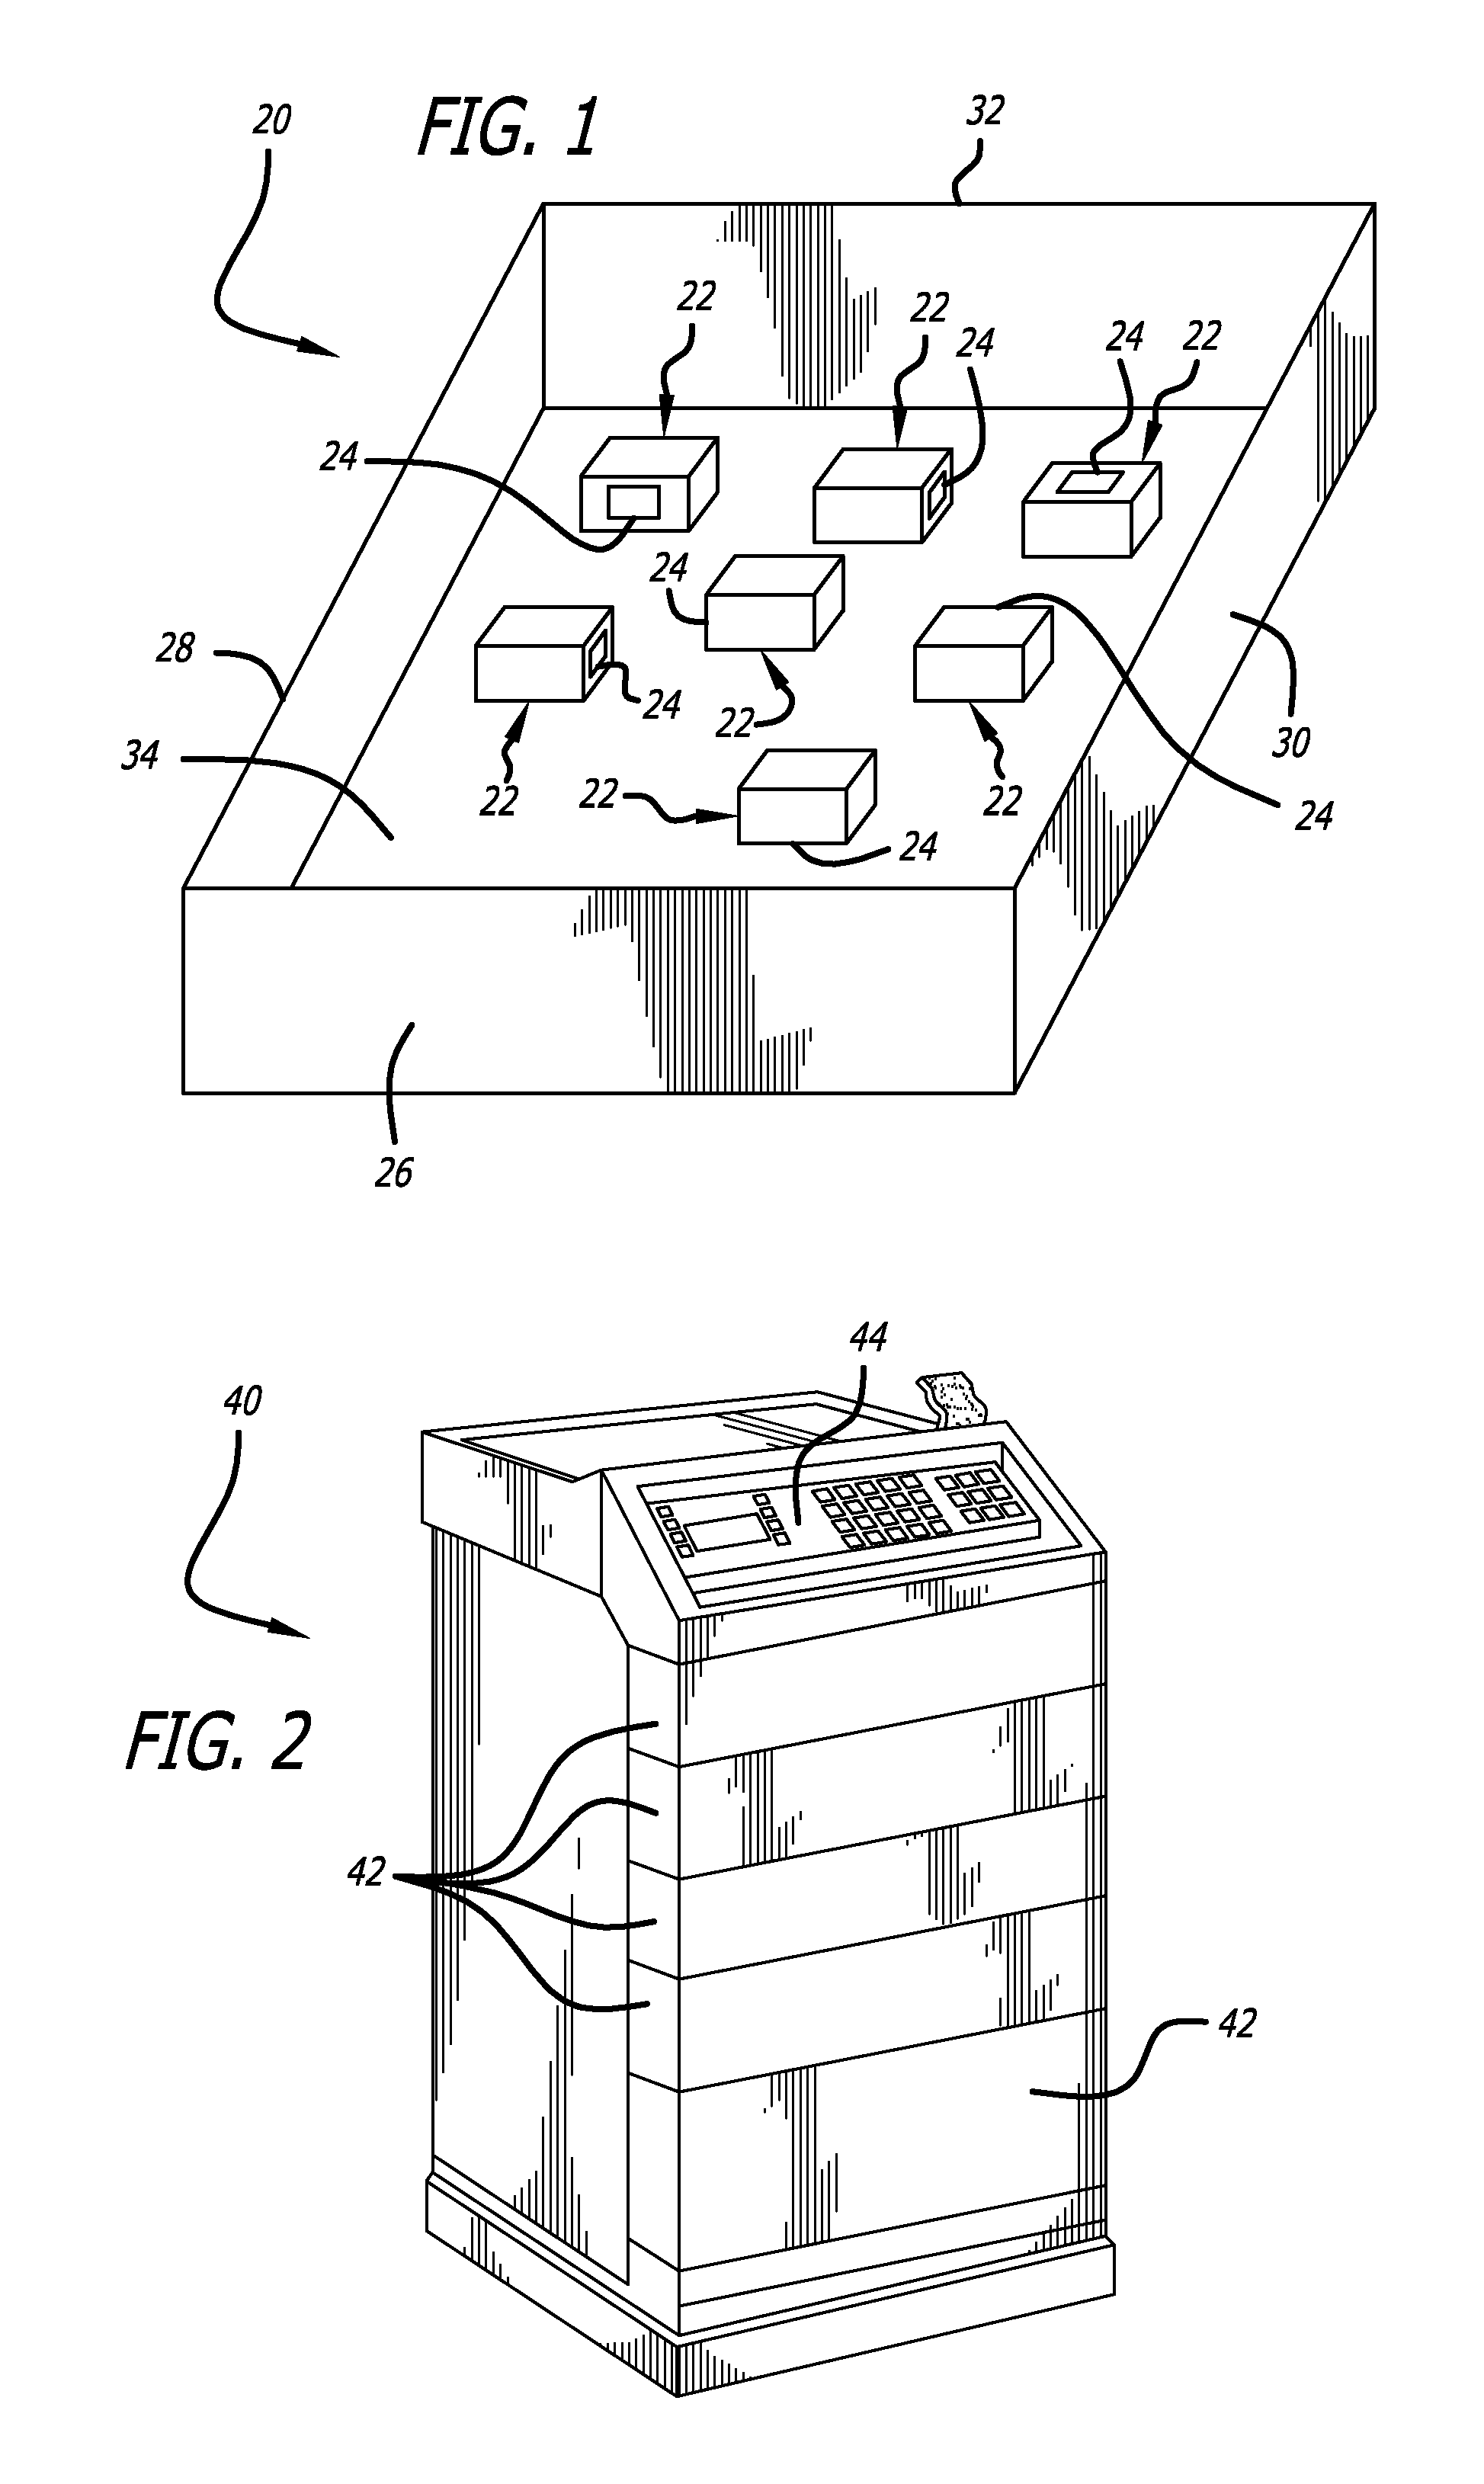 Self-contained rfid-enabled drawer module